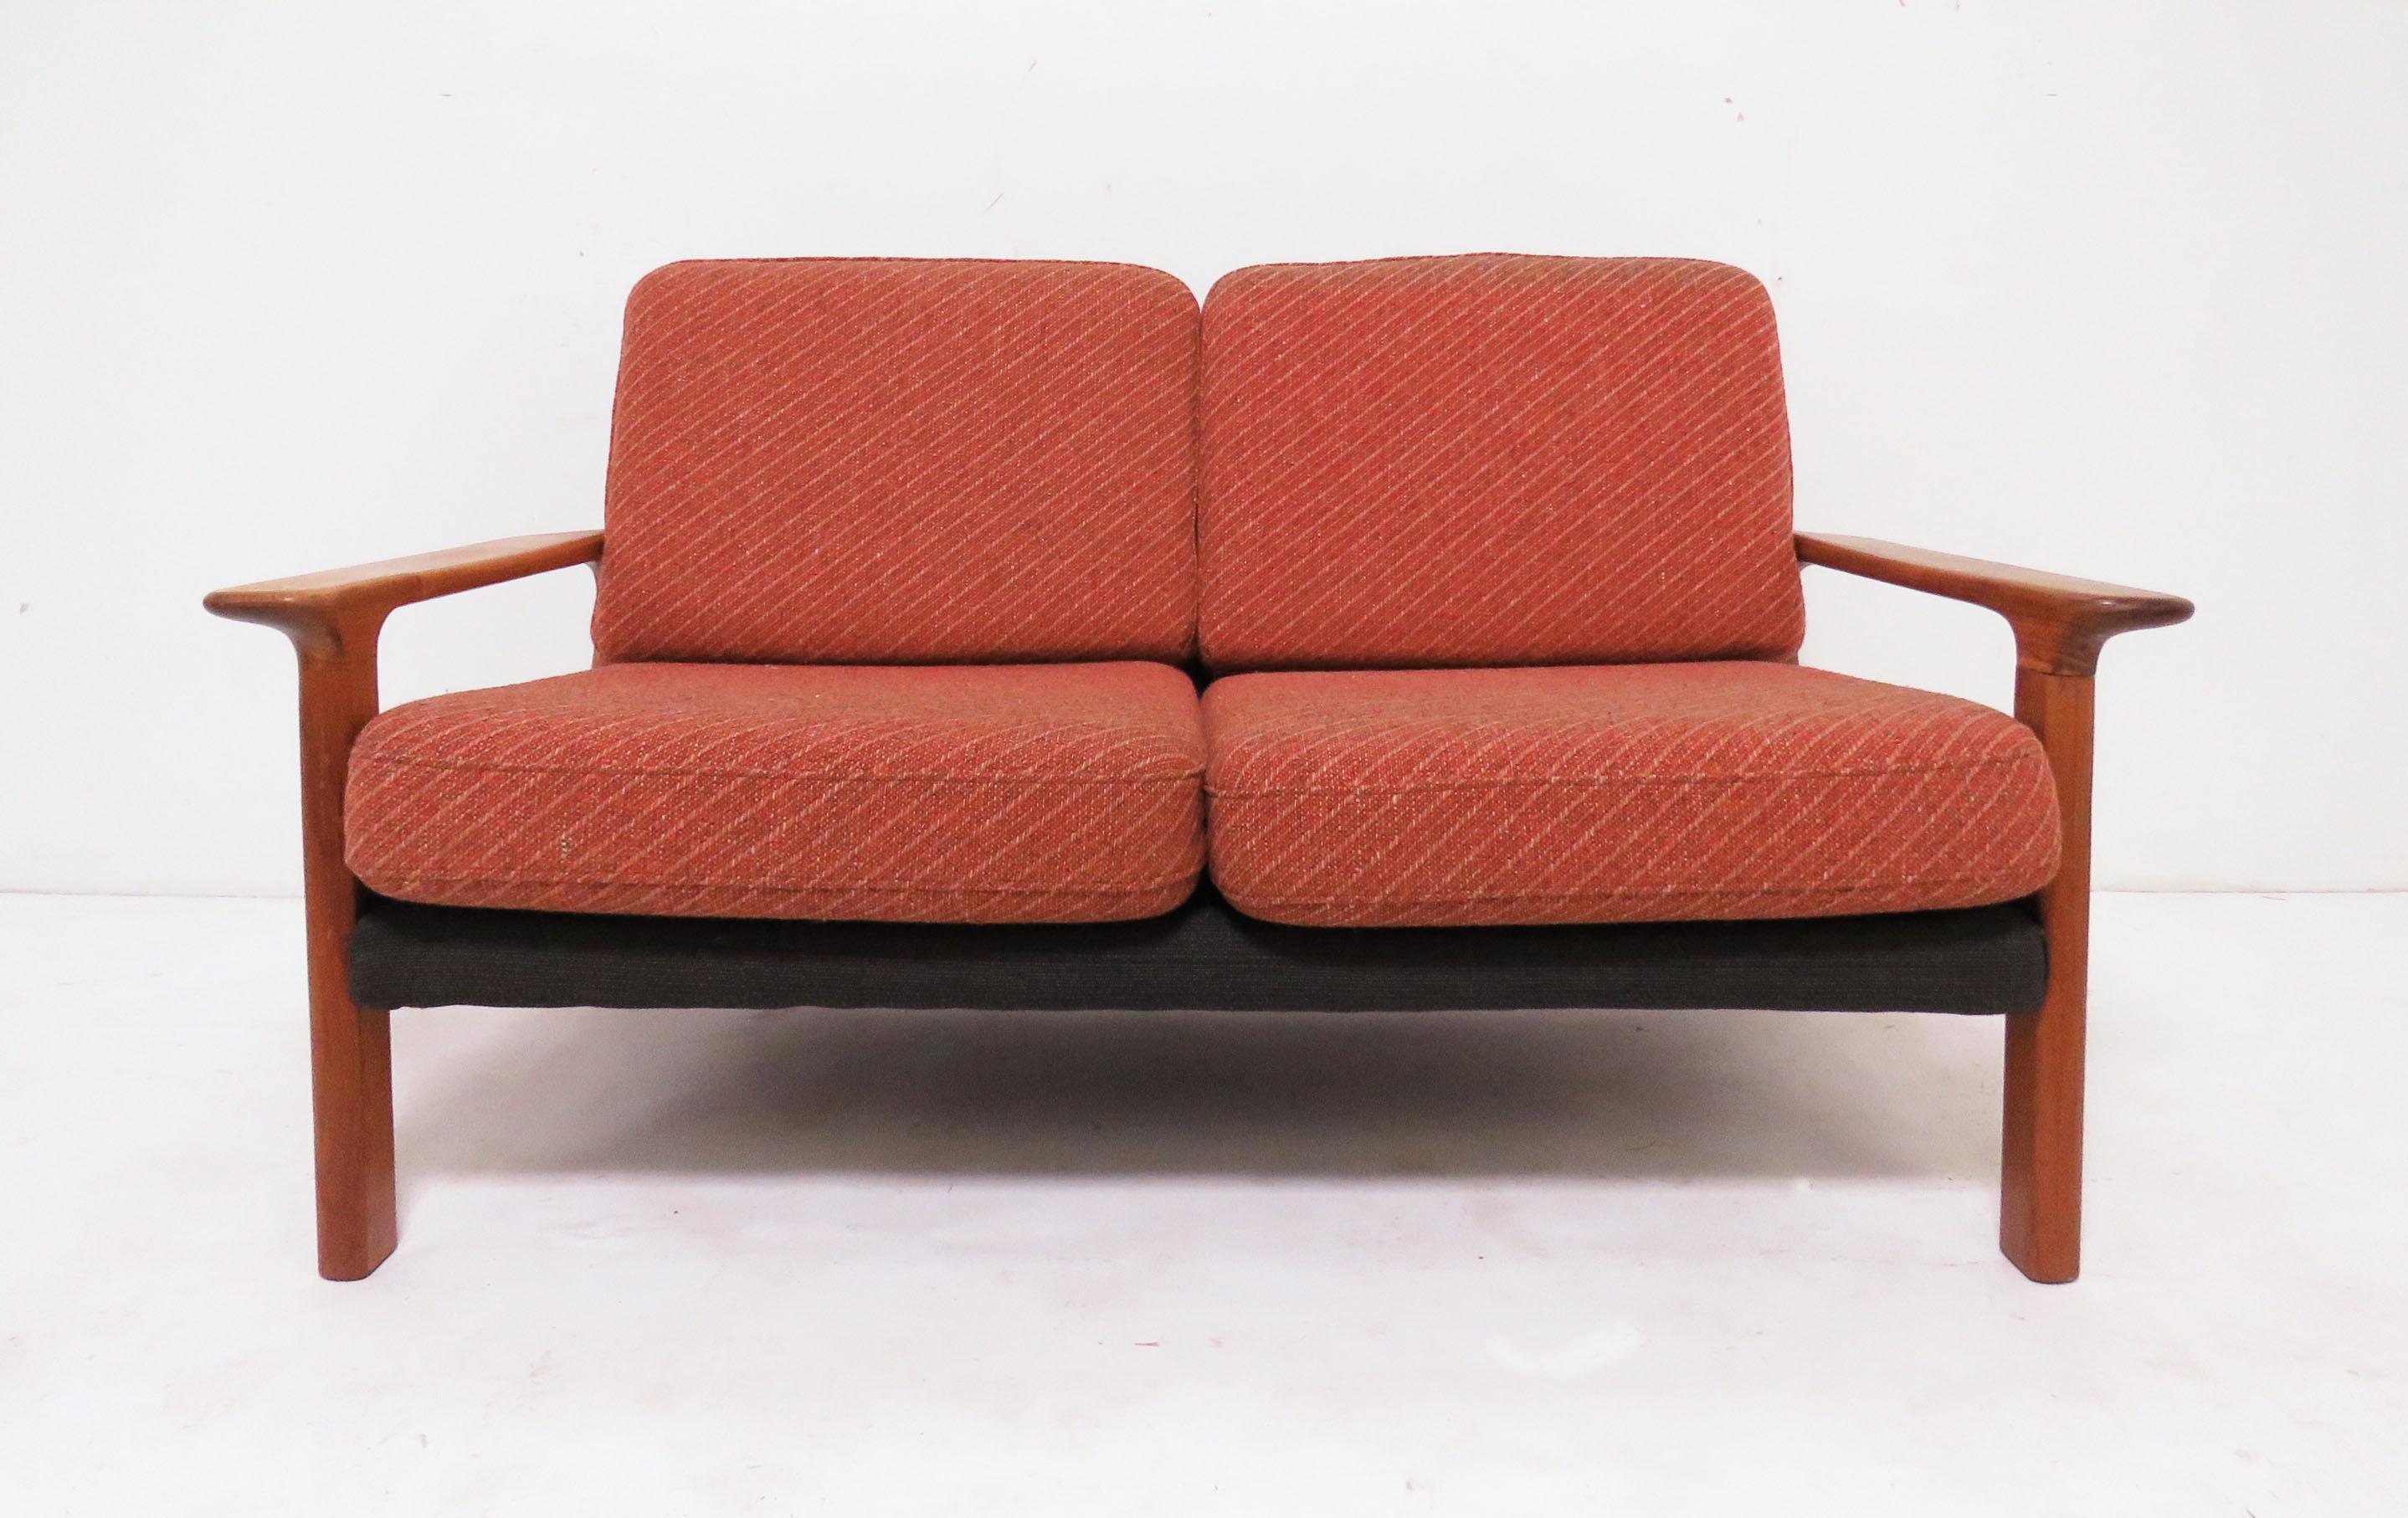 Teak Mid-Century Modern loveseat paddle arm sofa with two-tone upholstery, circa 1970s. Unknown maker.